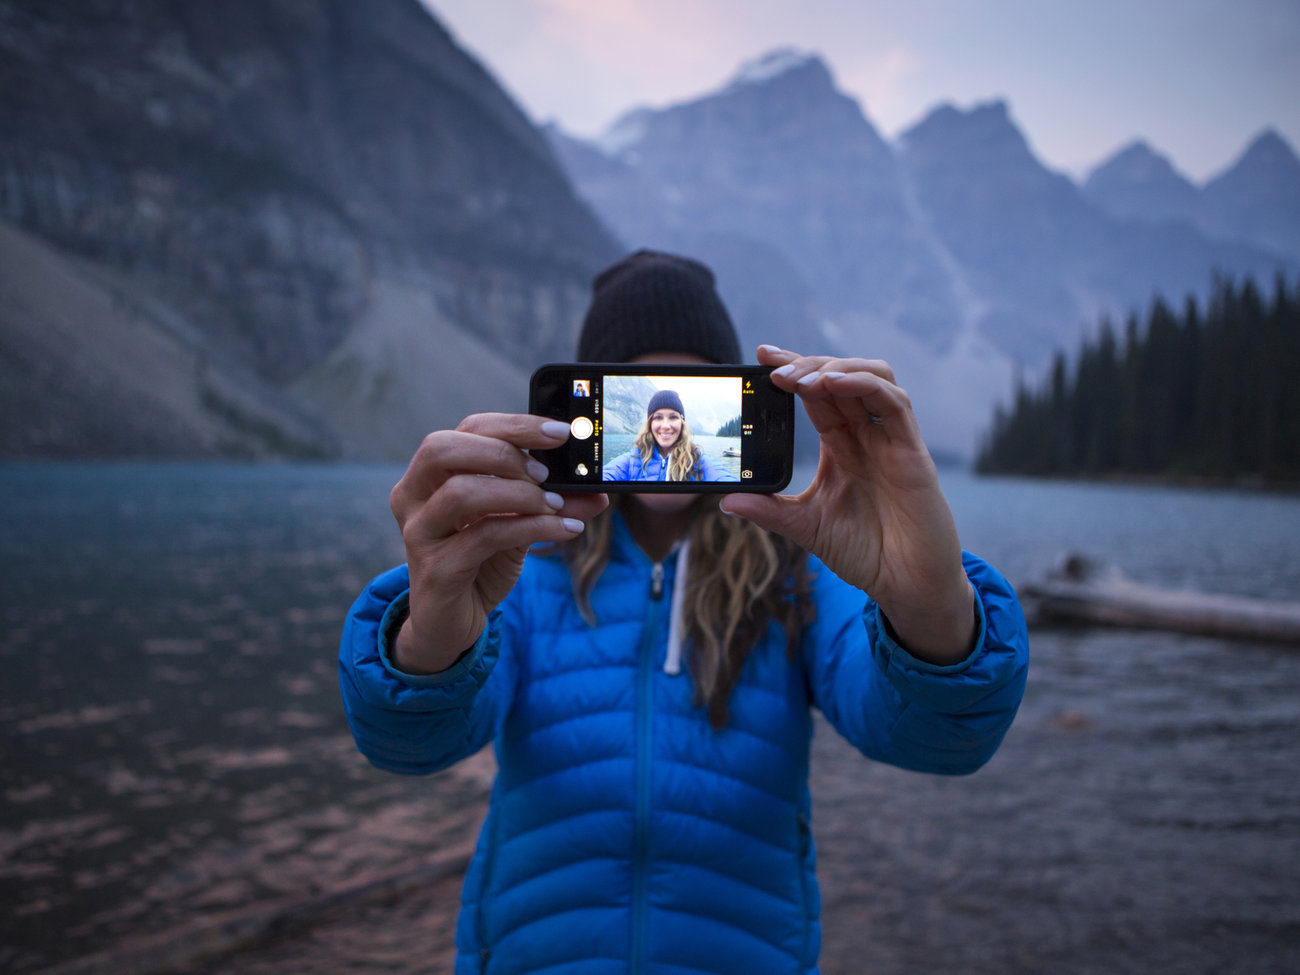 This Selfie Contest Can Earn You a VIP National Park Getaway